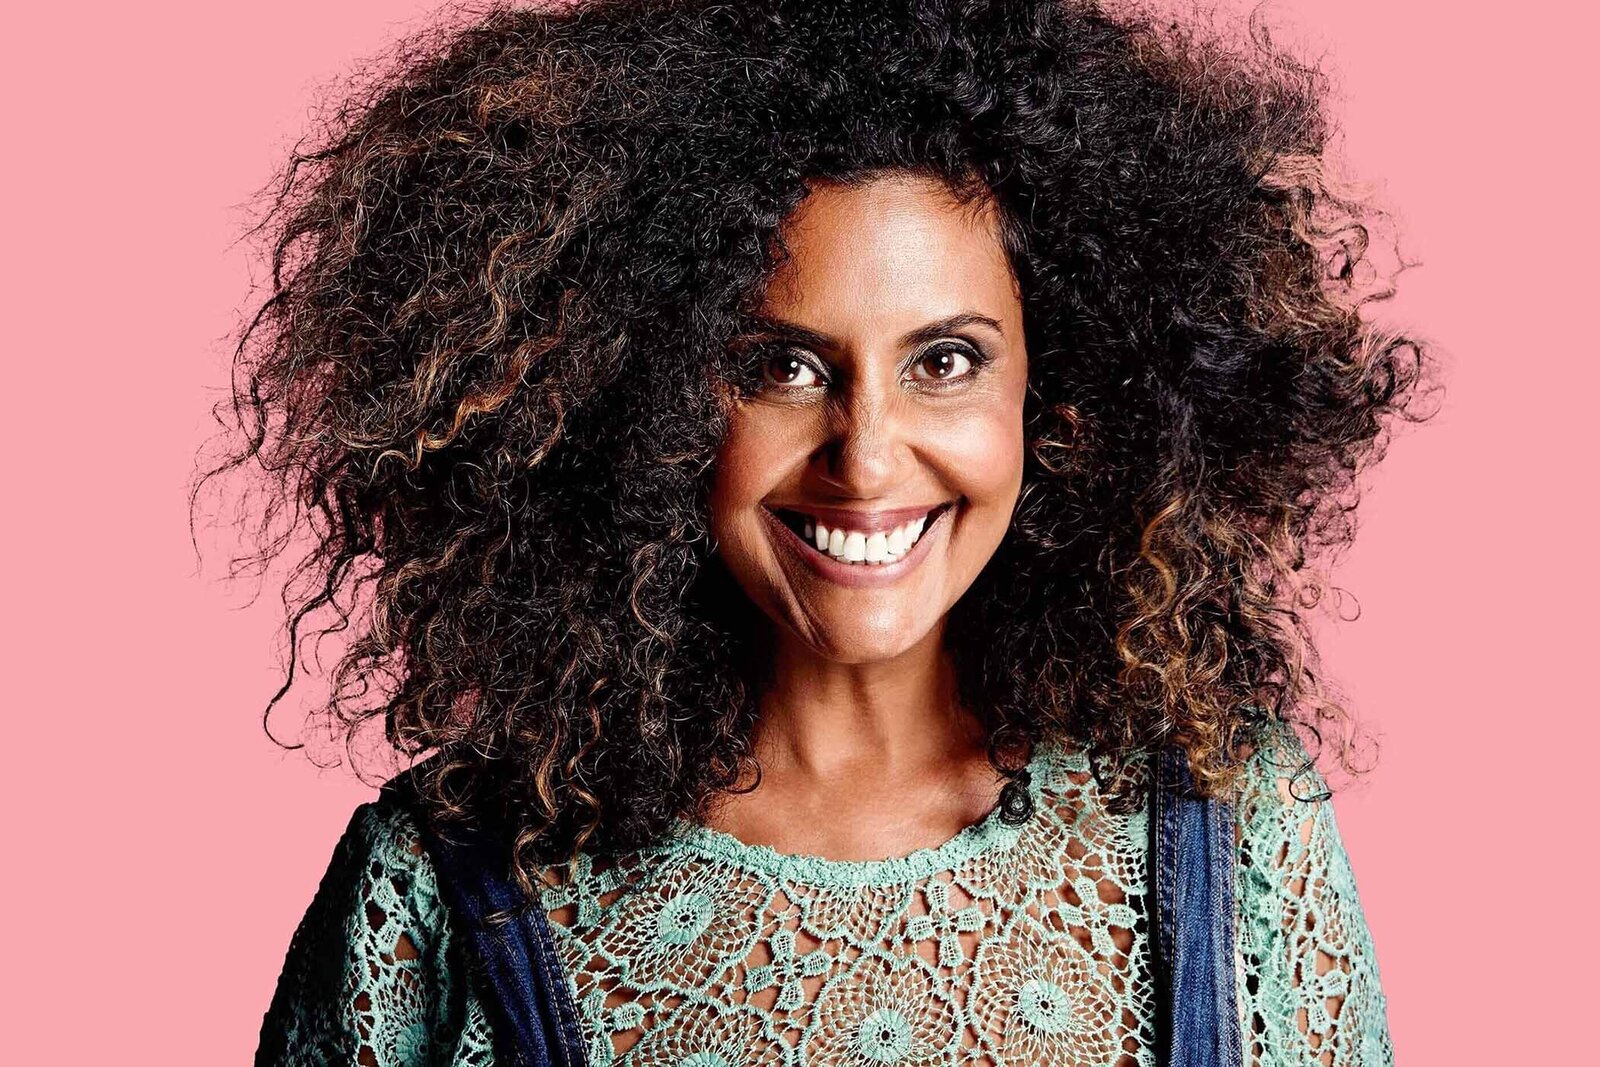 Hero image of woman with afro hair, big smile against pink background.